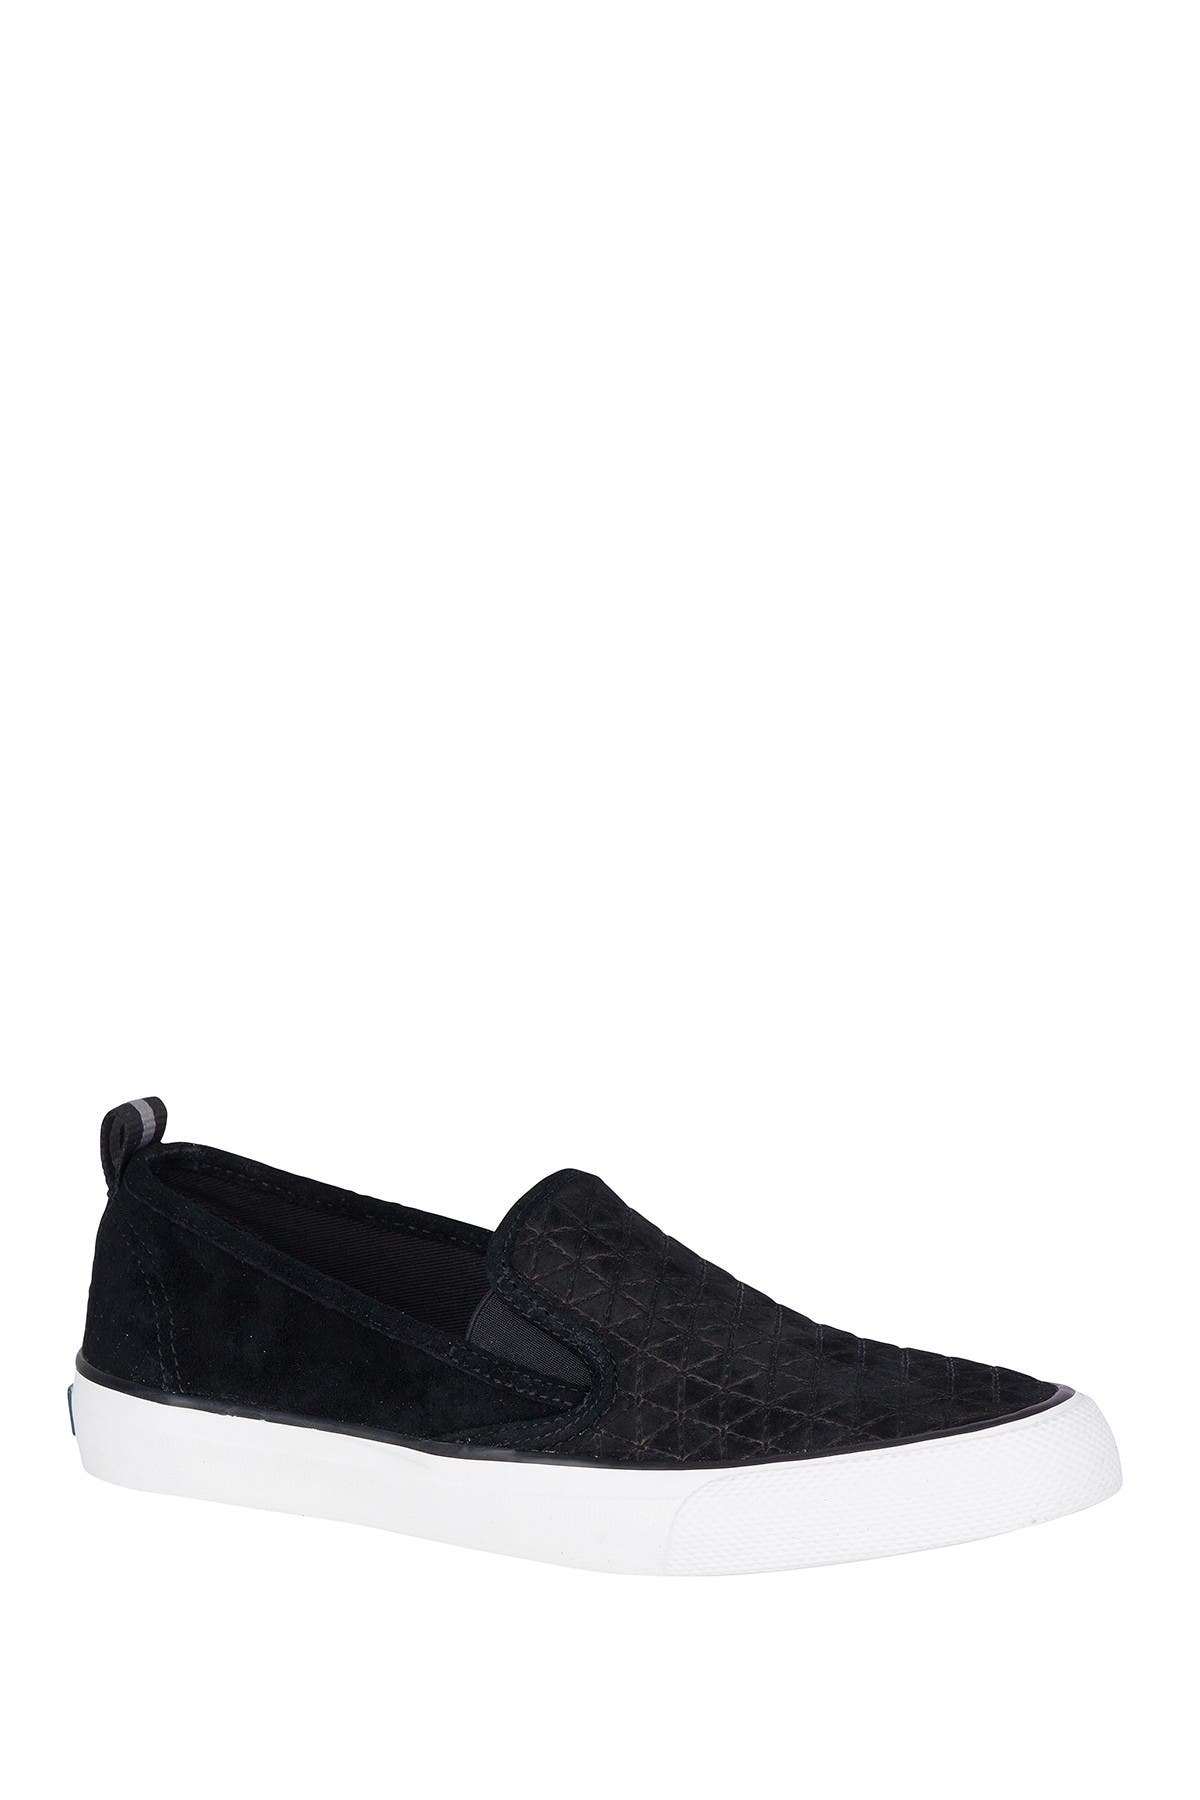 quilted black slip on sneakers